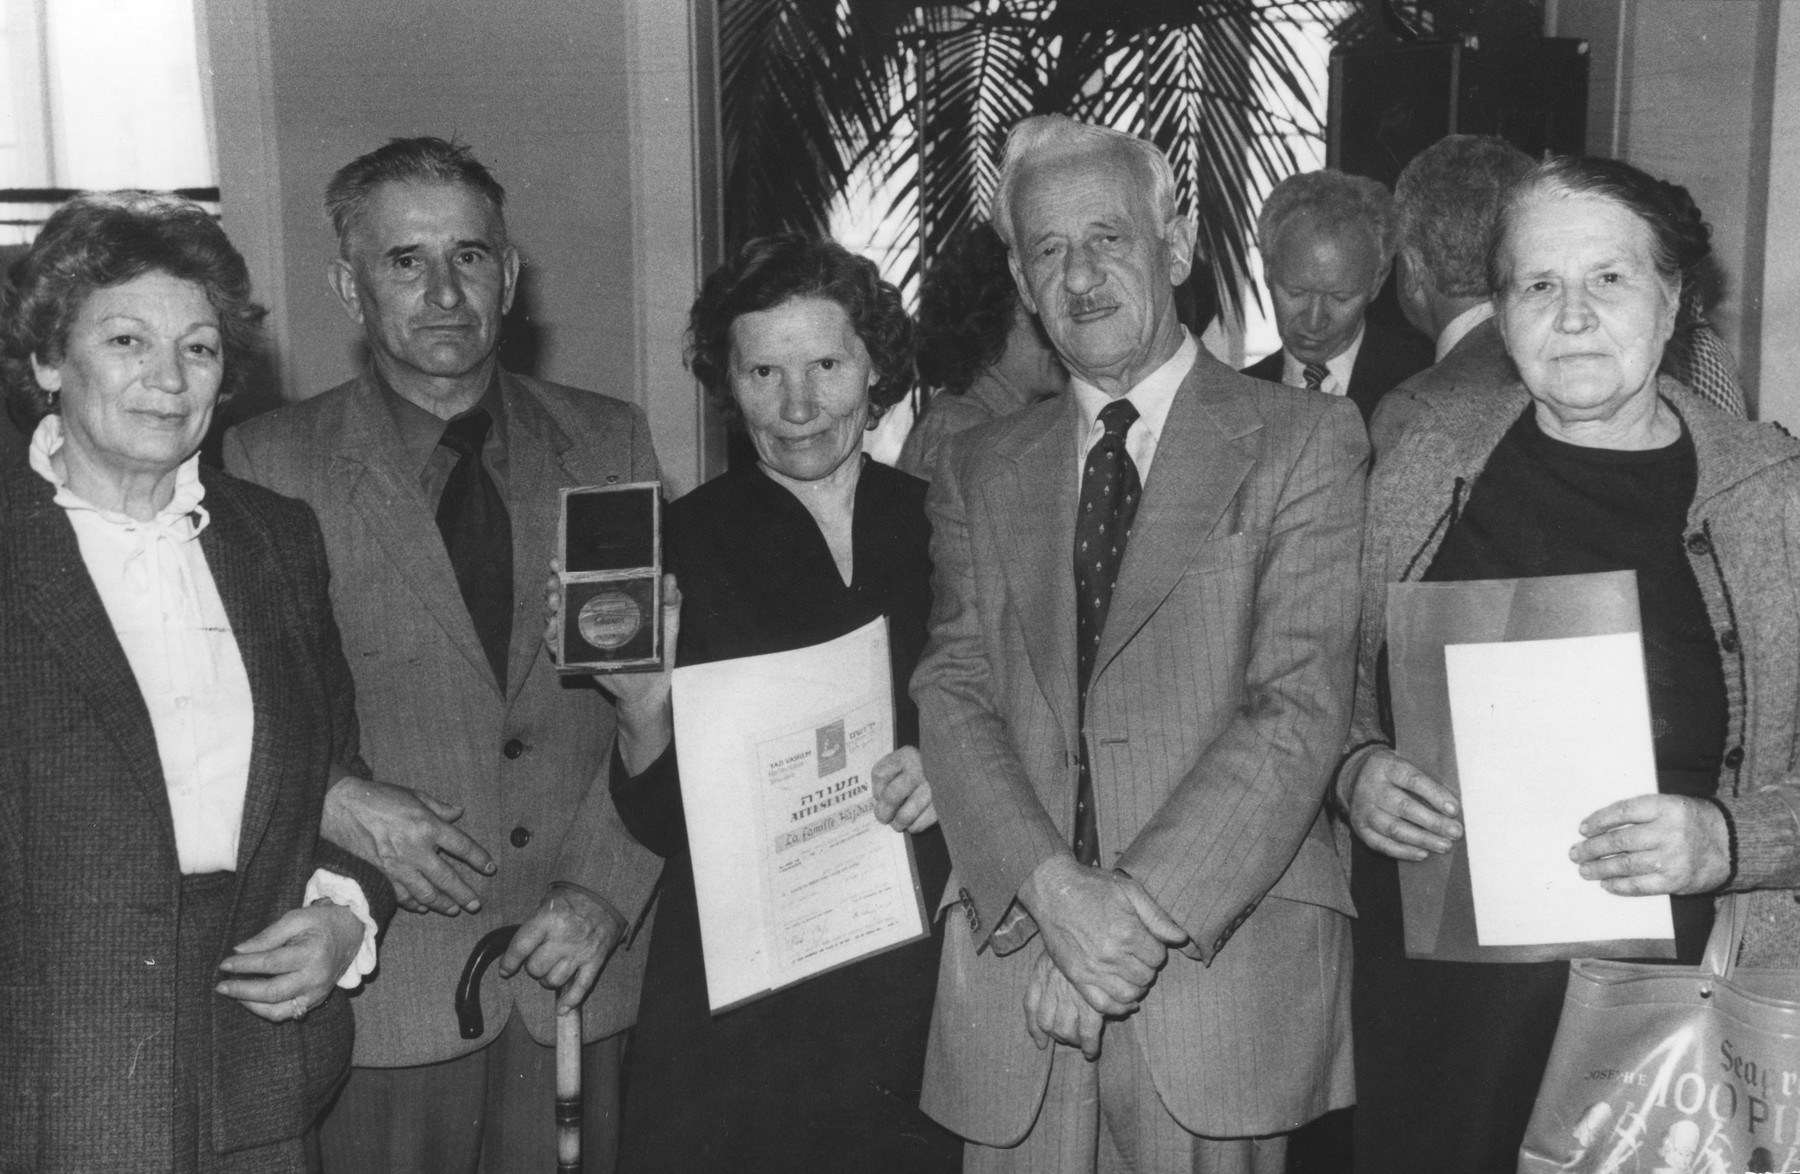 The Hajdas family is awarded the Righteous among the Nations medal from Yad Vashem for their assistance to Polish Jews during the war.  

Among those pictured are Warsaw ghetto fighter, Stefan Grajek (second from the right) and his wife, Uta Grajek (far left).